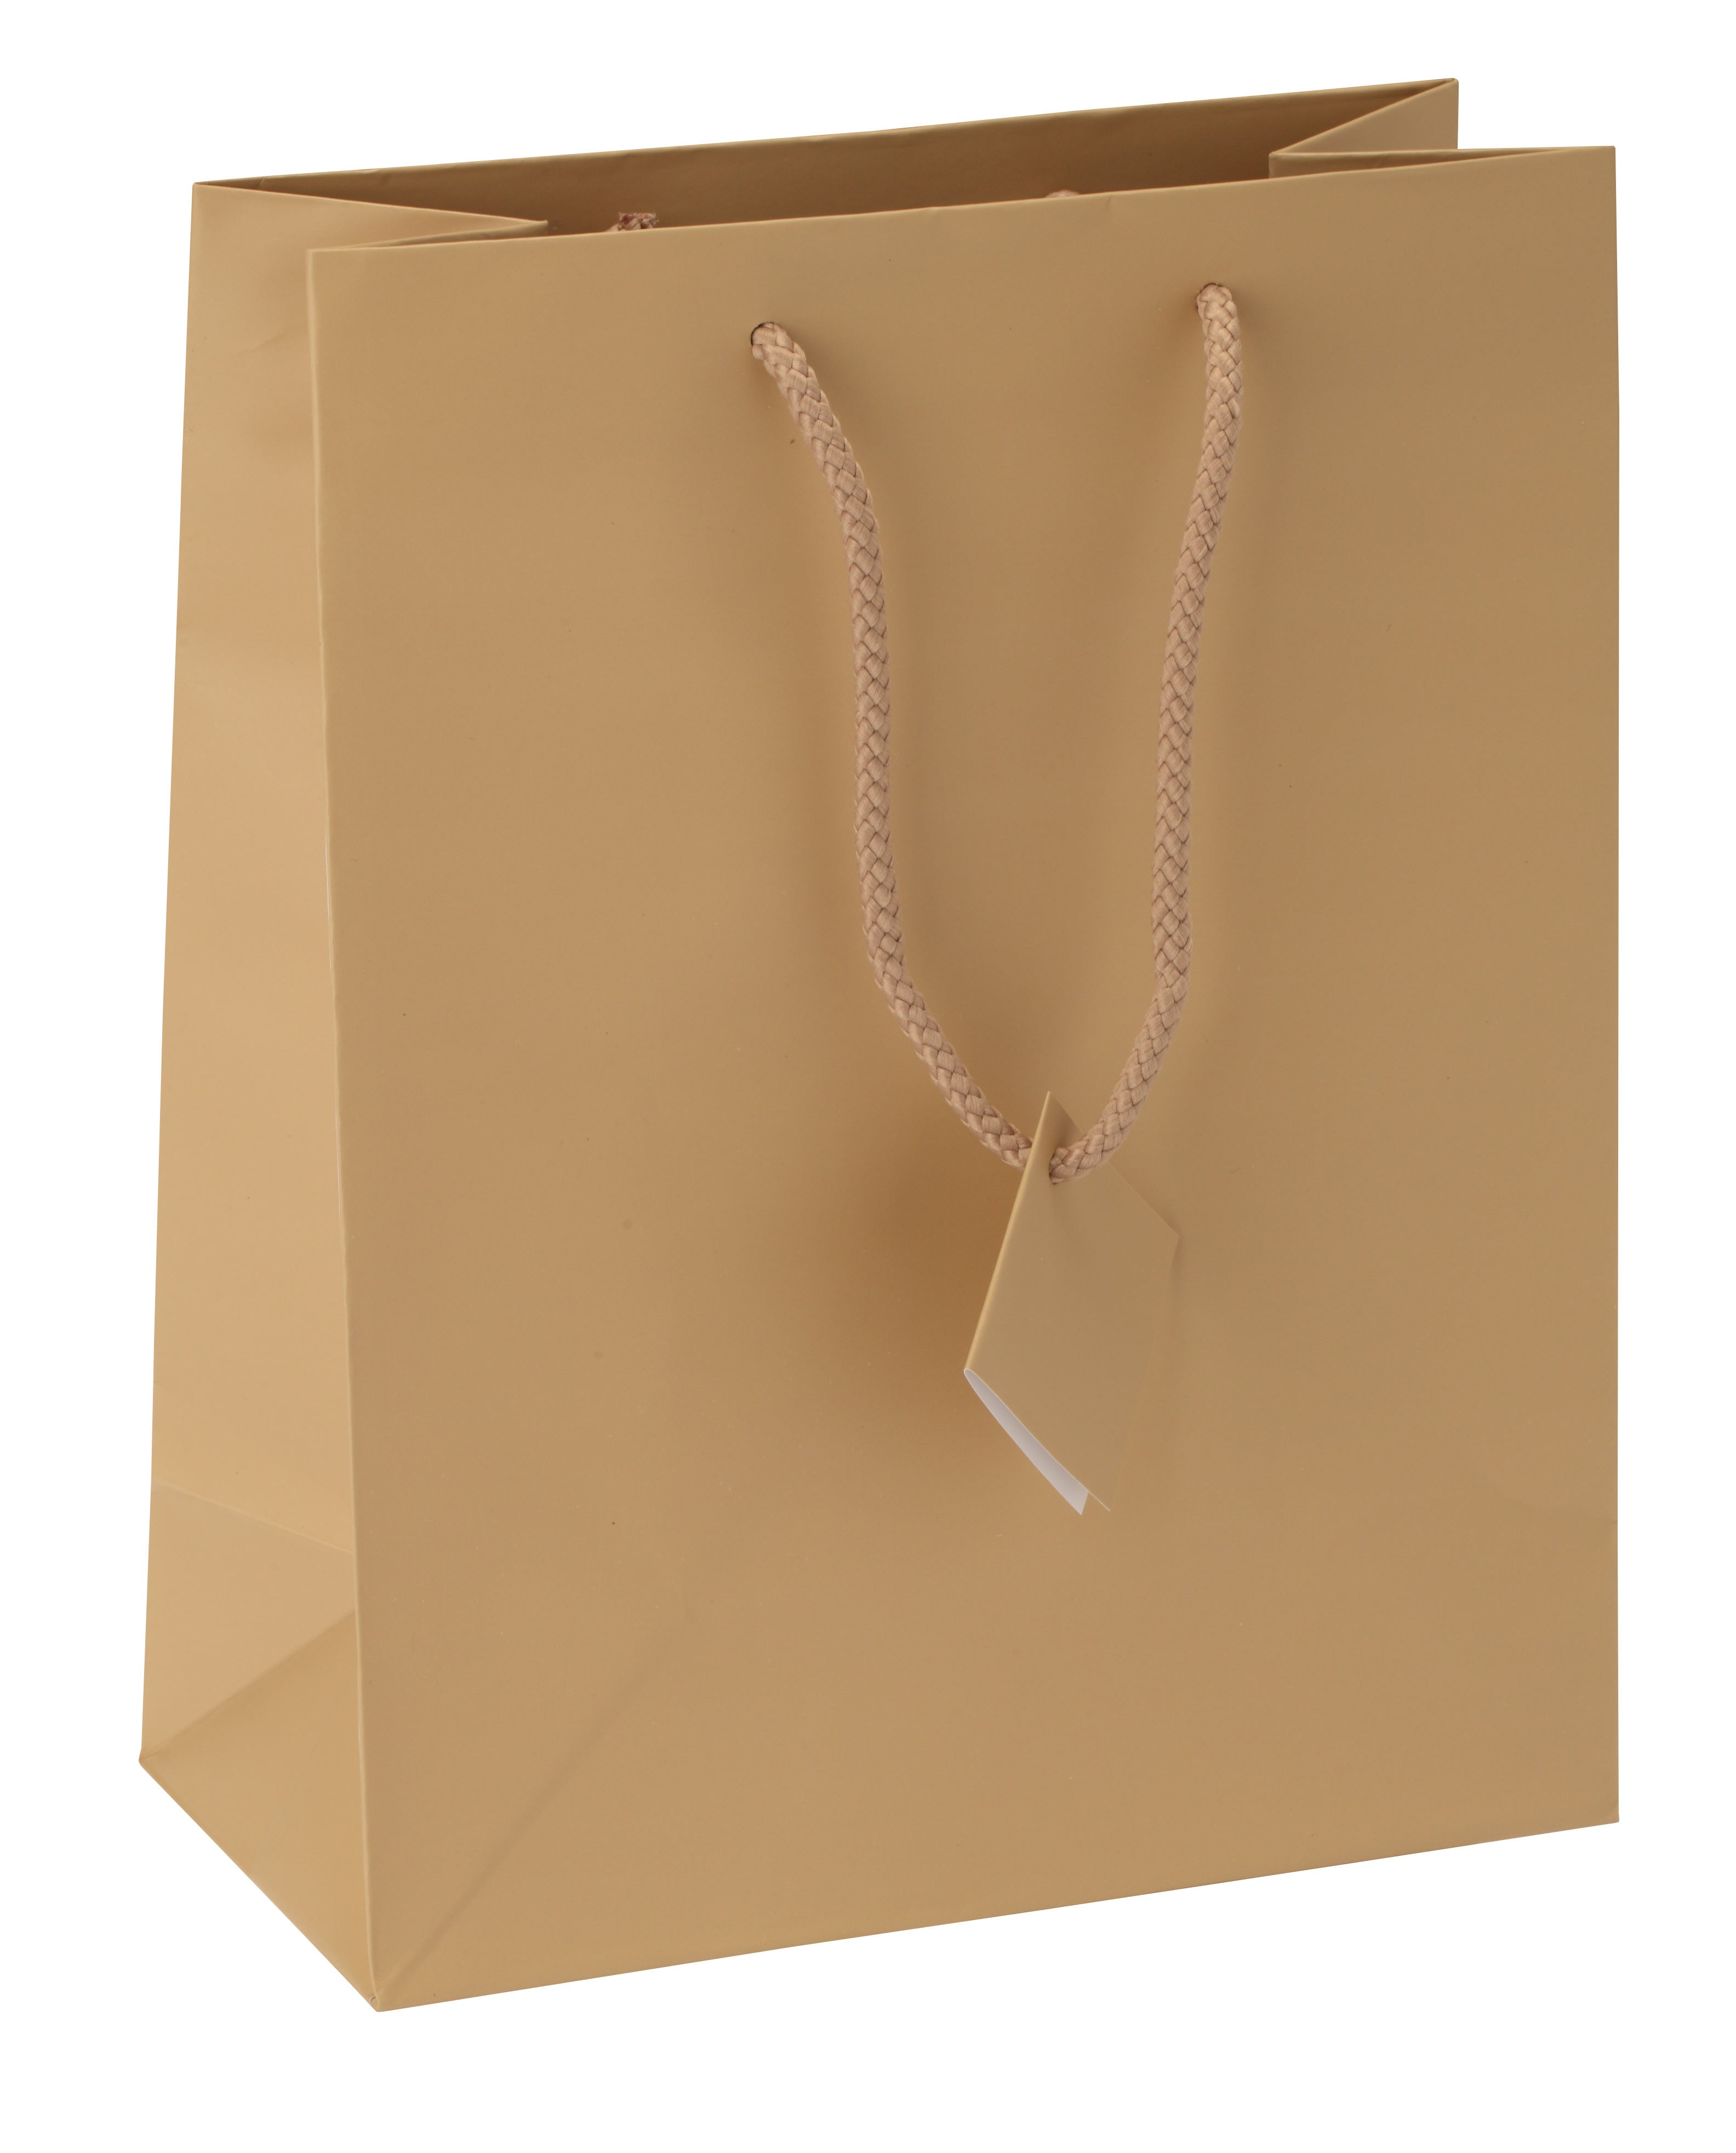 Satin-Finish Tote-Style Gift Bags in Khaki